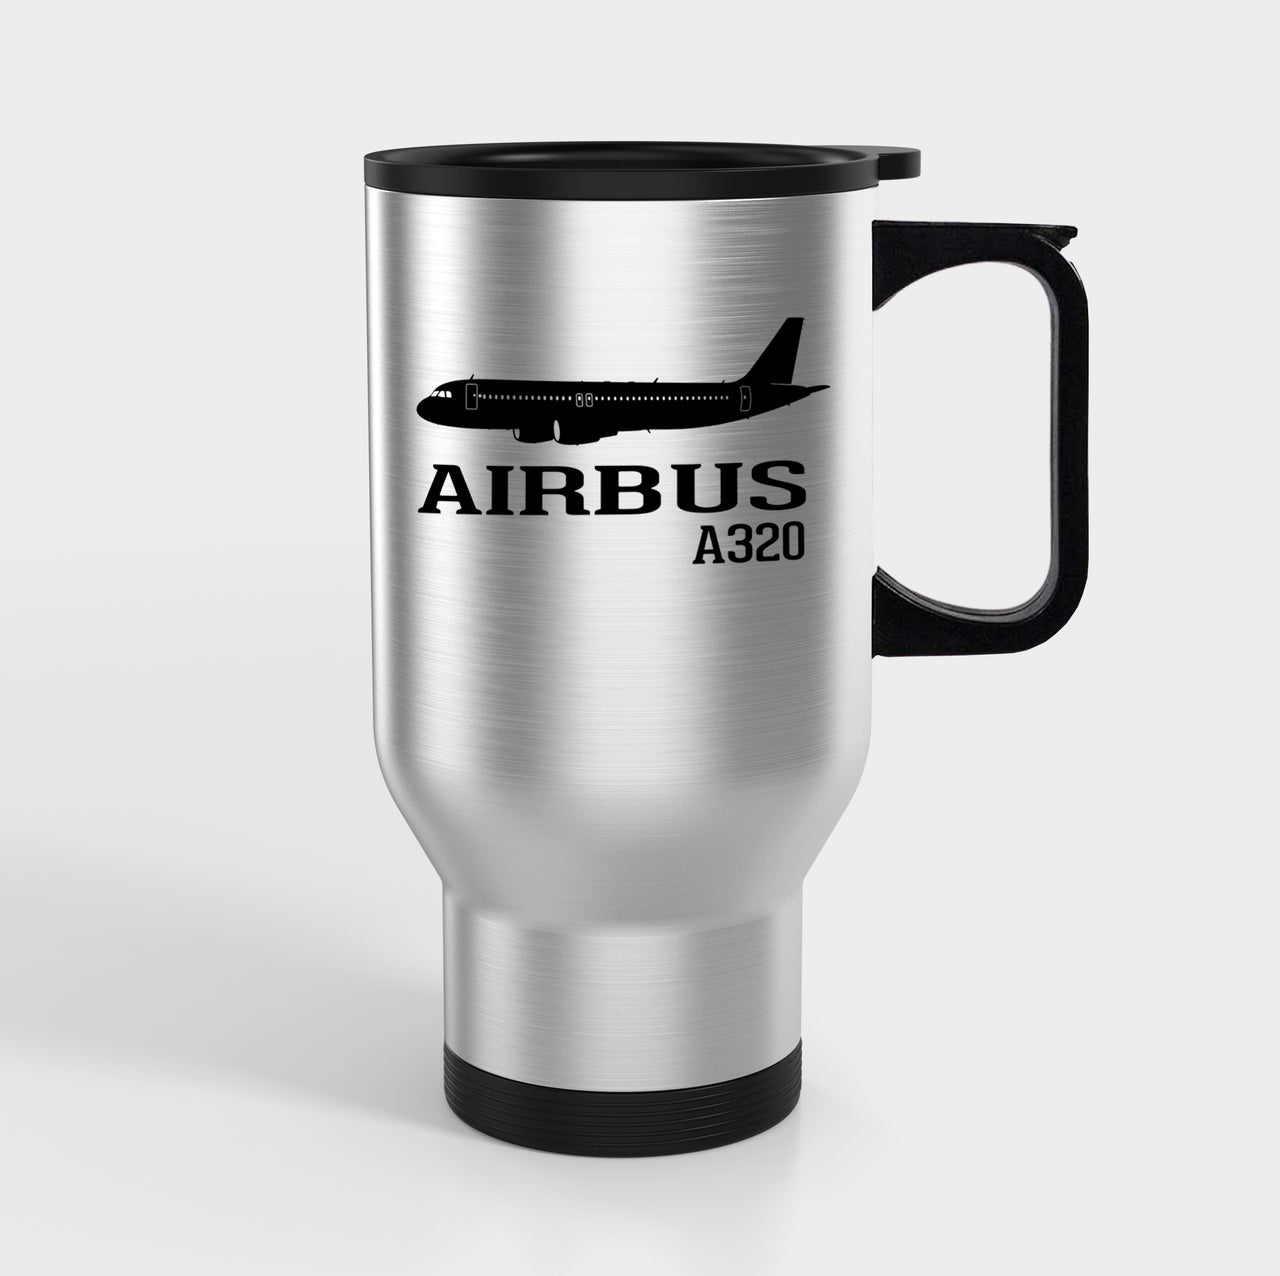 Airbus A320 Printed Designed Travel Mugs (With Holder)